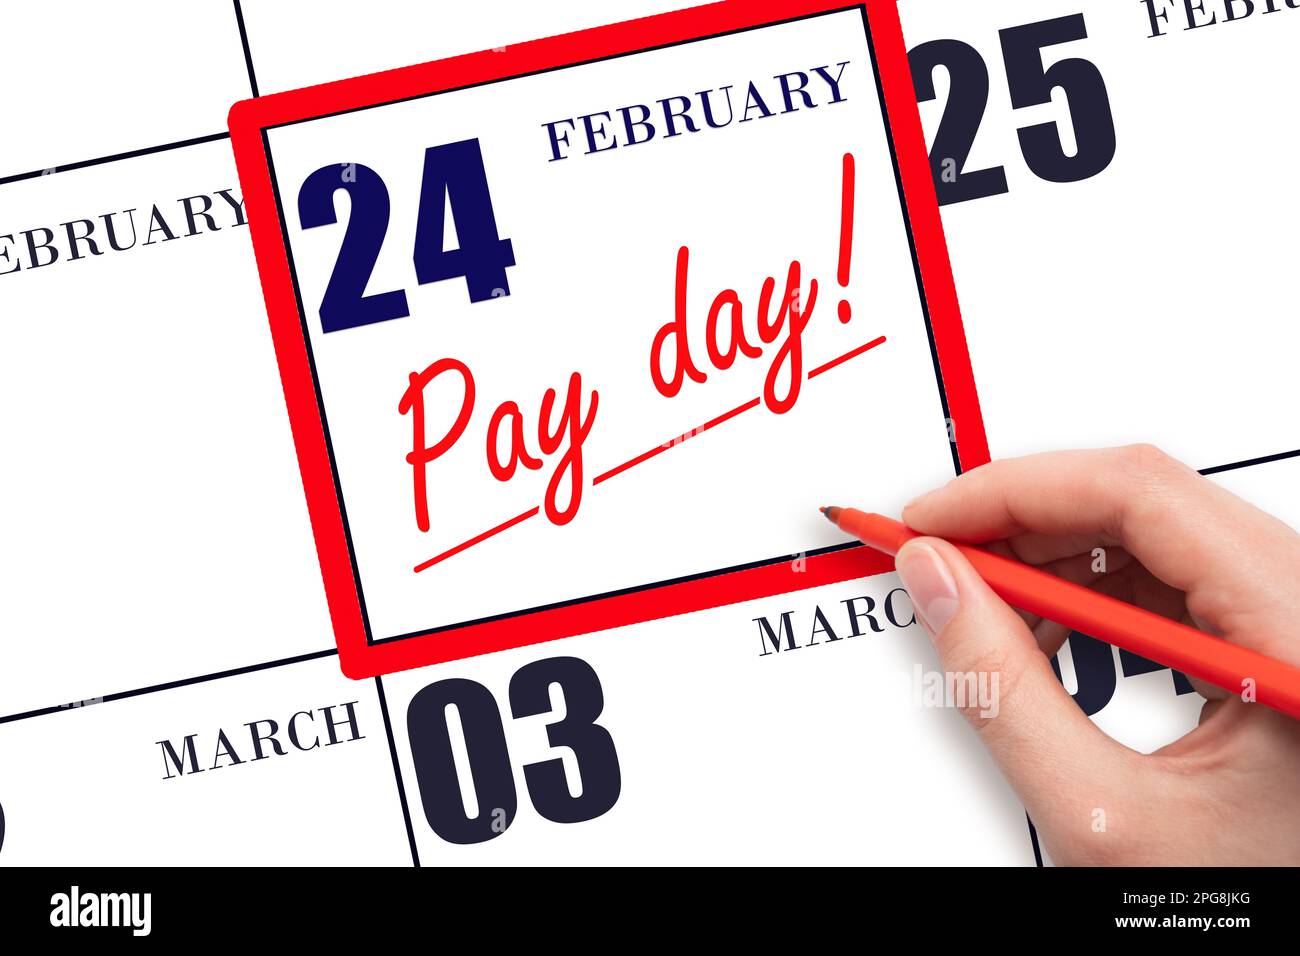 24th day of February. Hand writing text PAY DATE on calendar date February 24 and underline it. Payment due date. Reminder concept of payment. Winter Stock Photo